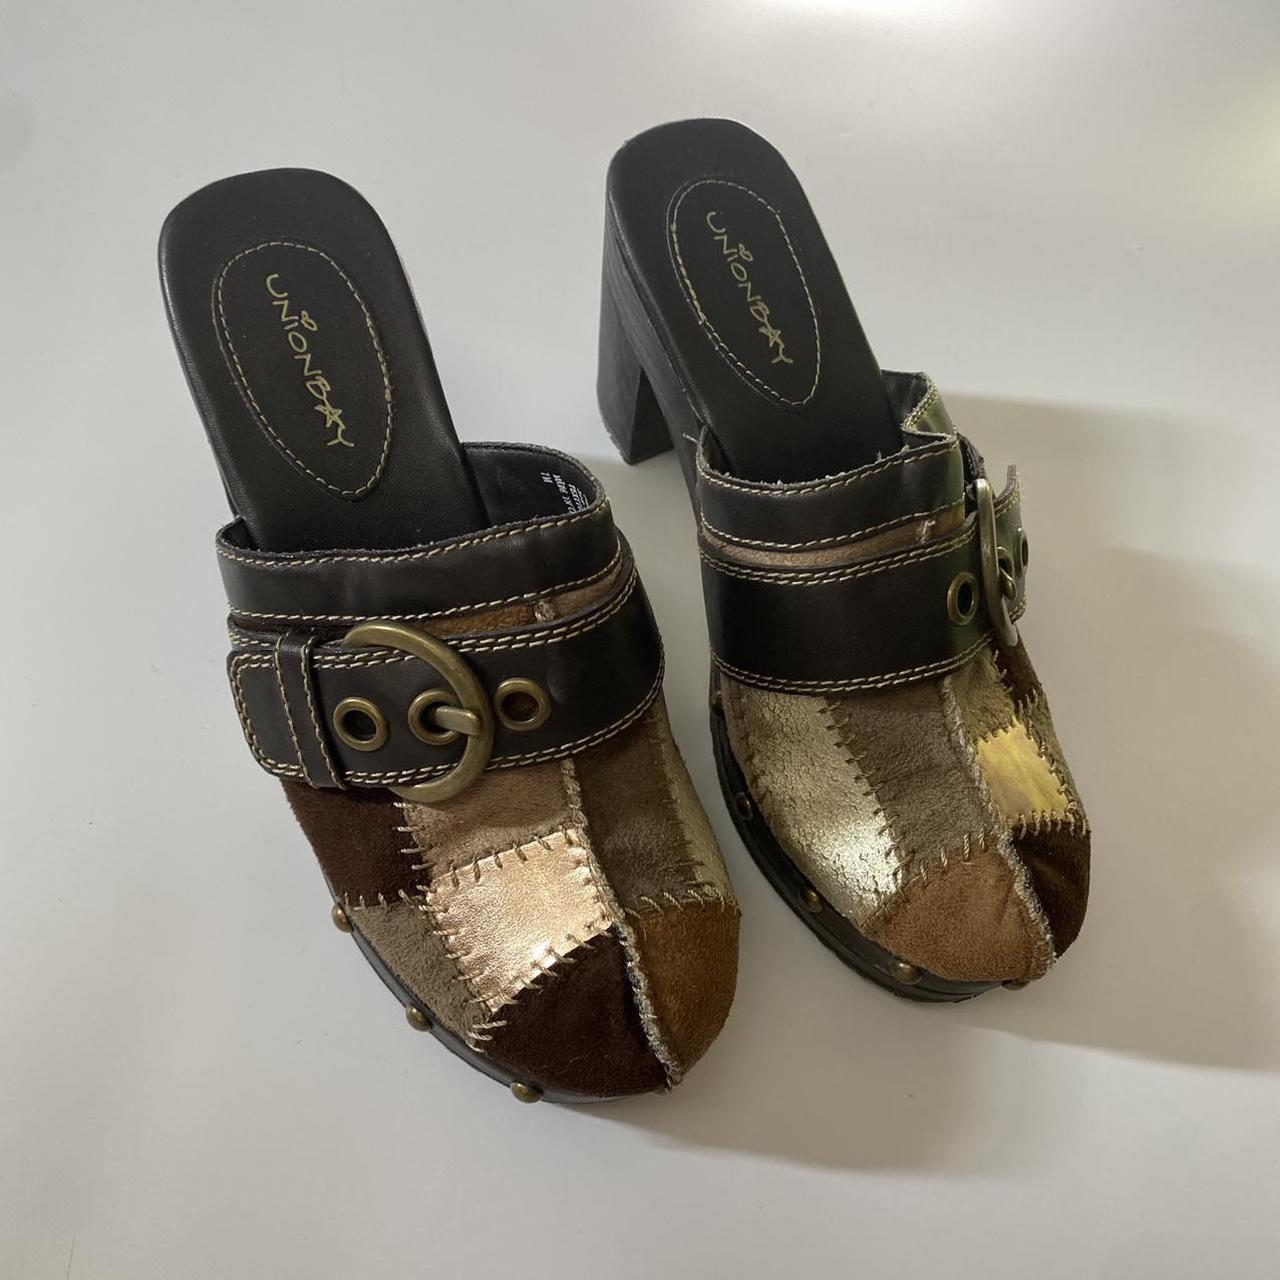 Union Bay Women's Brown and Gold Clogs (2)